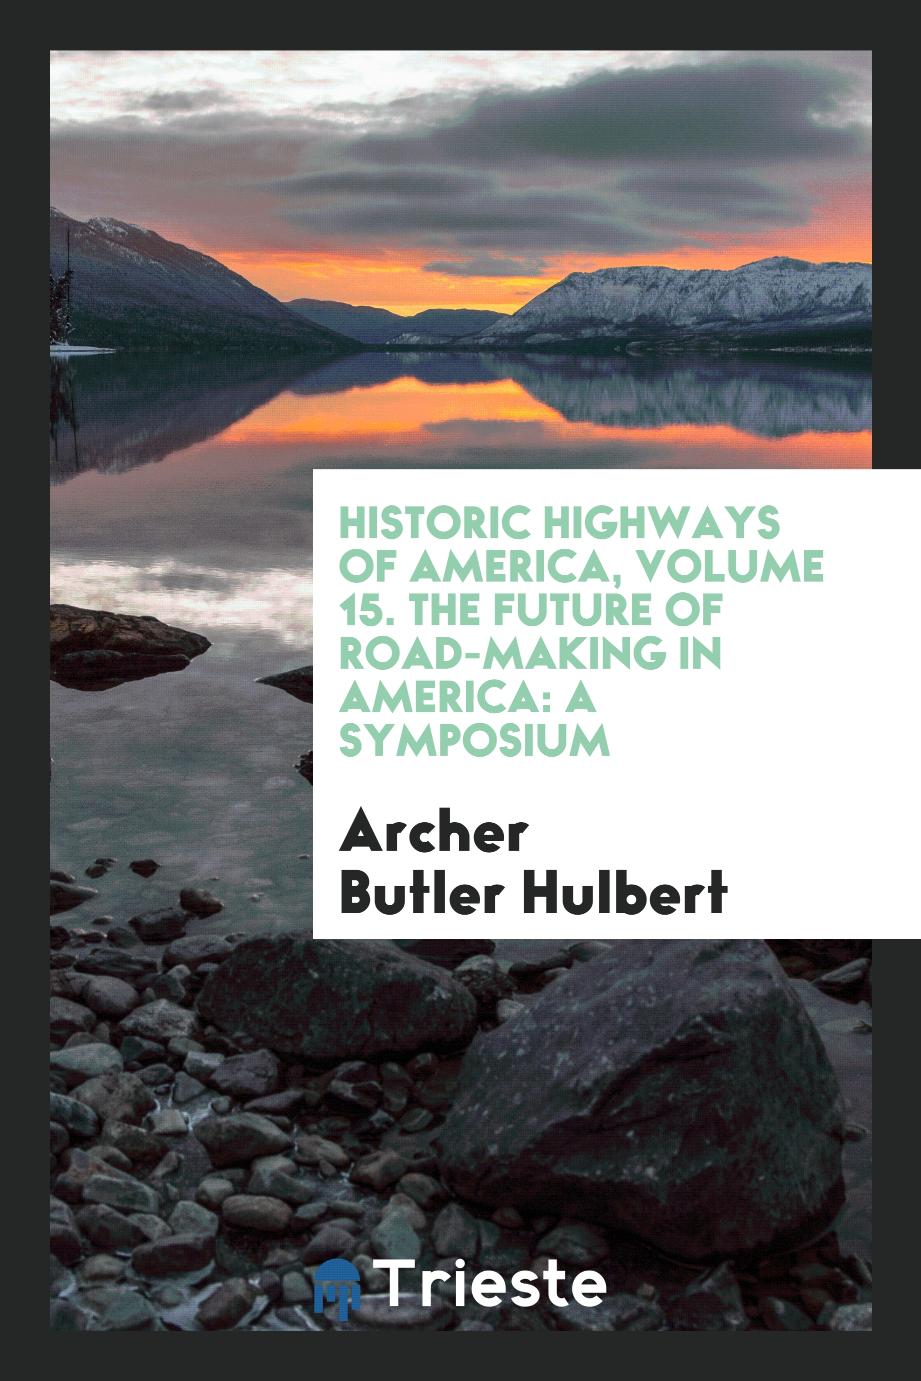 Historic Highways of America, Volume 15. The Future of Road-making in America: A Symposium